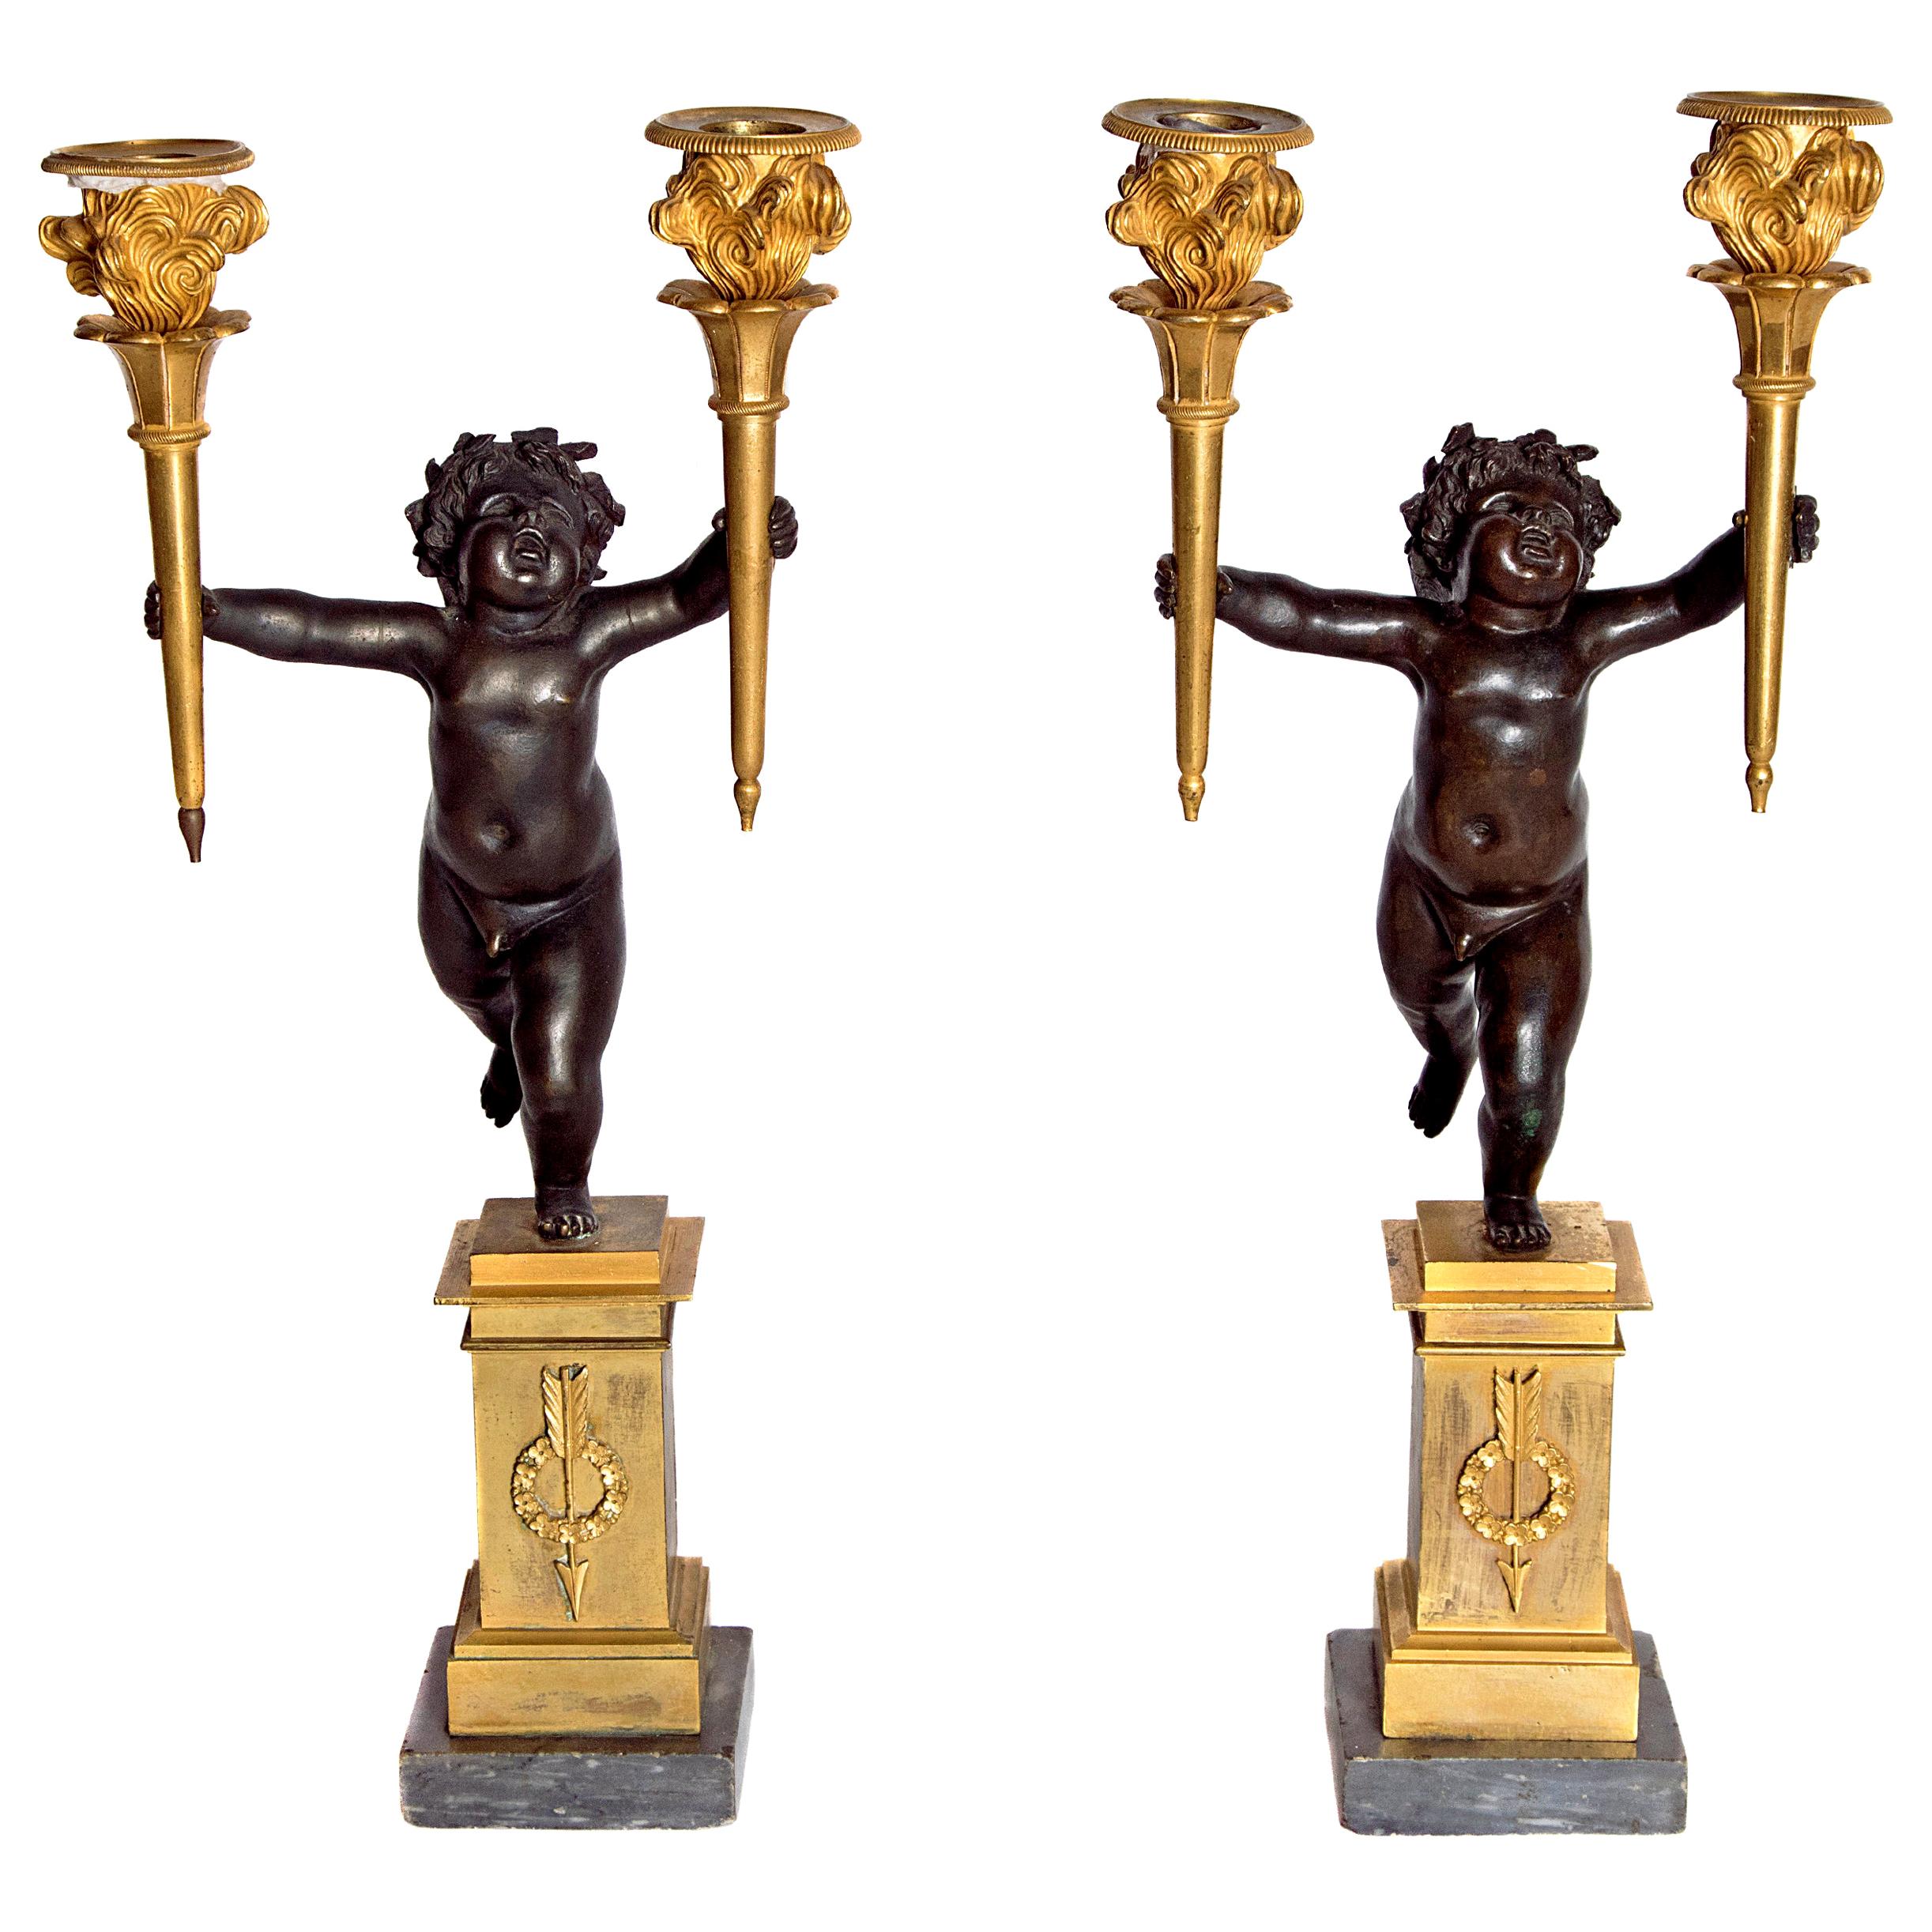 Pair of French Charles X Patinated Bronze and Gilt Figurative Candelabras For Sale